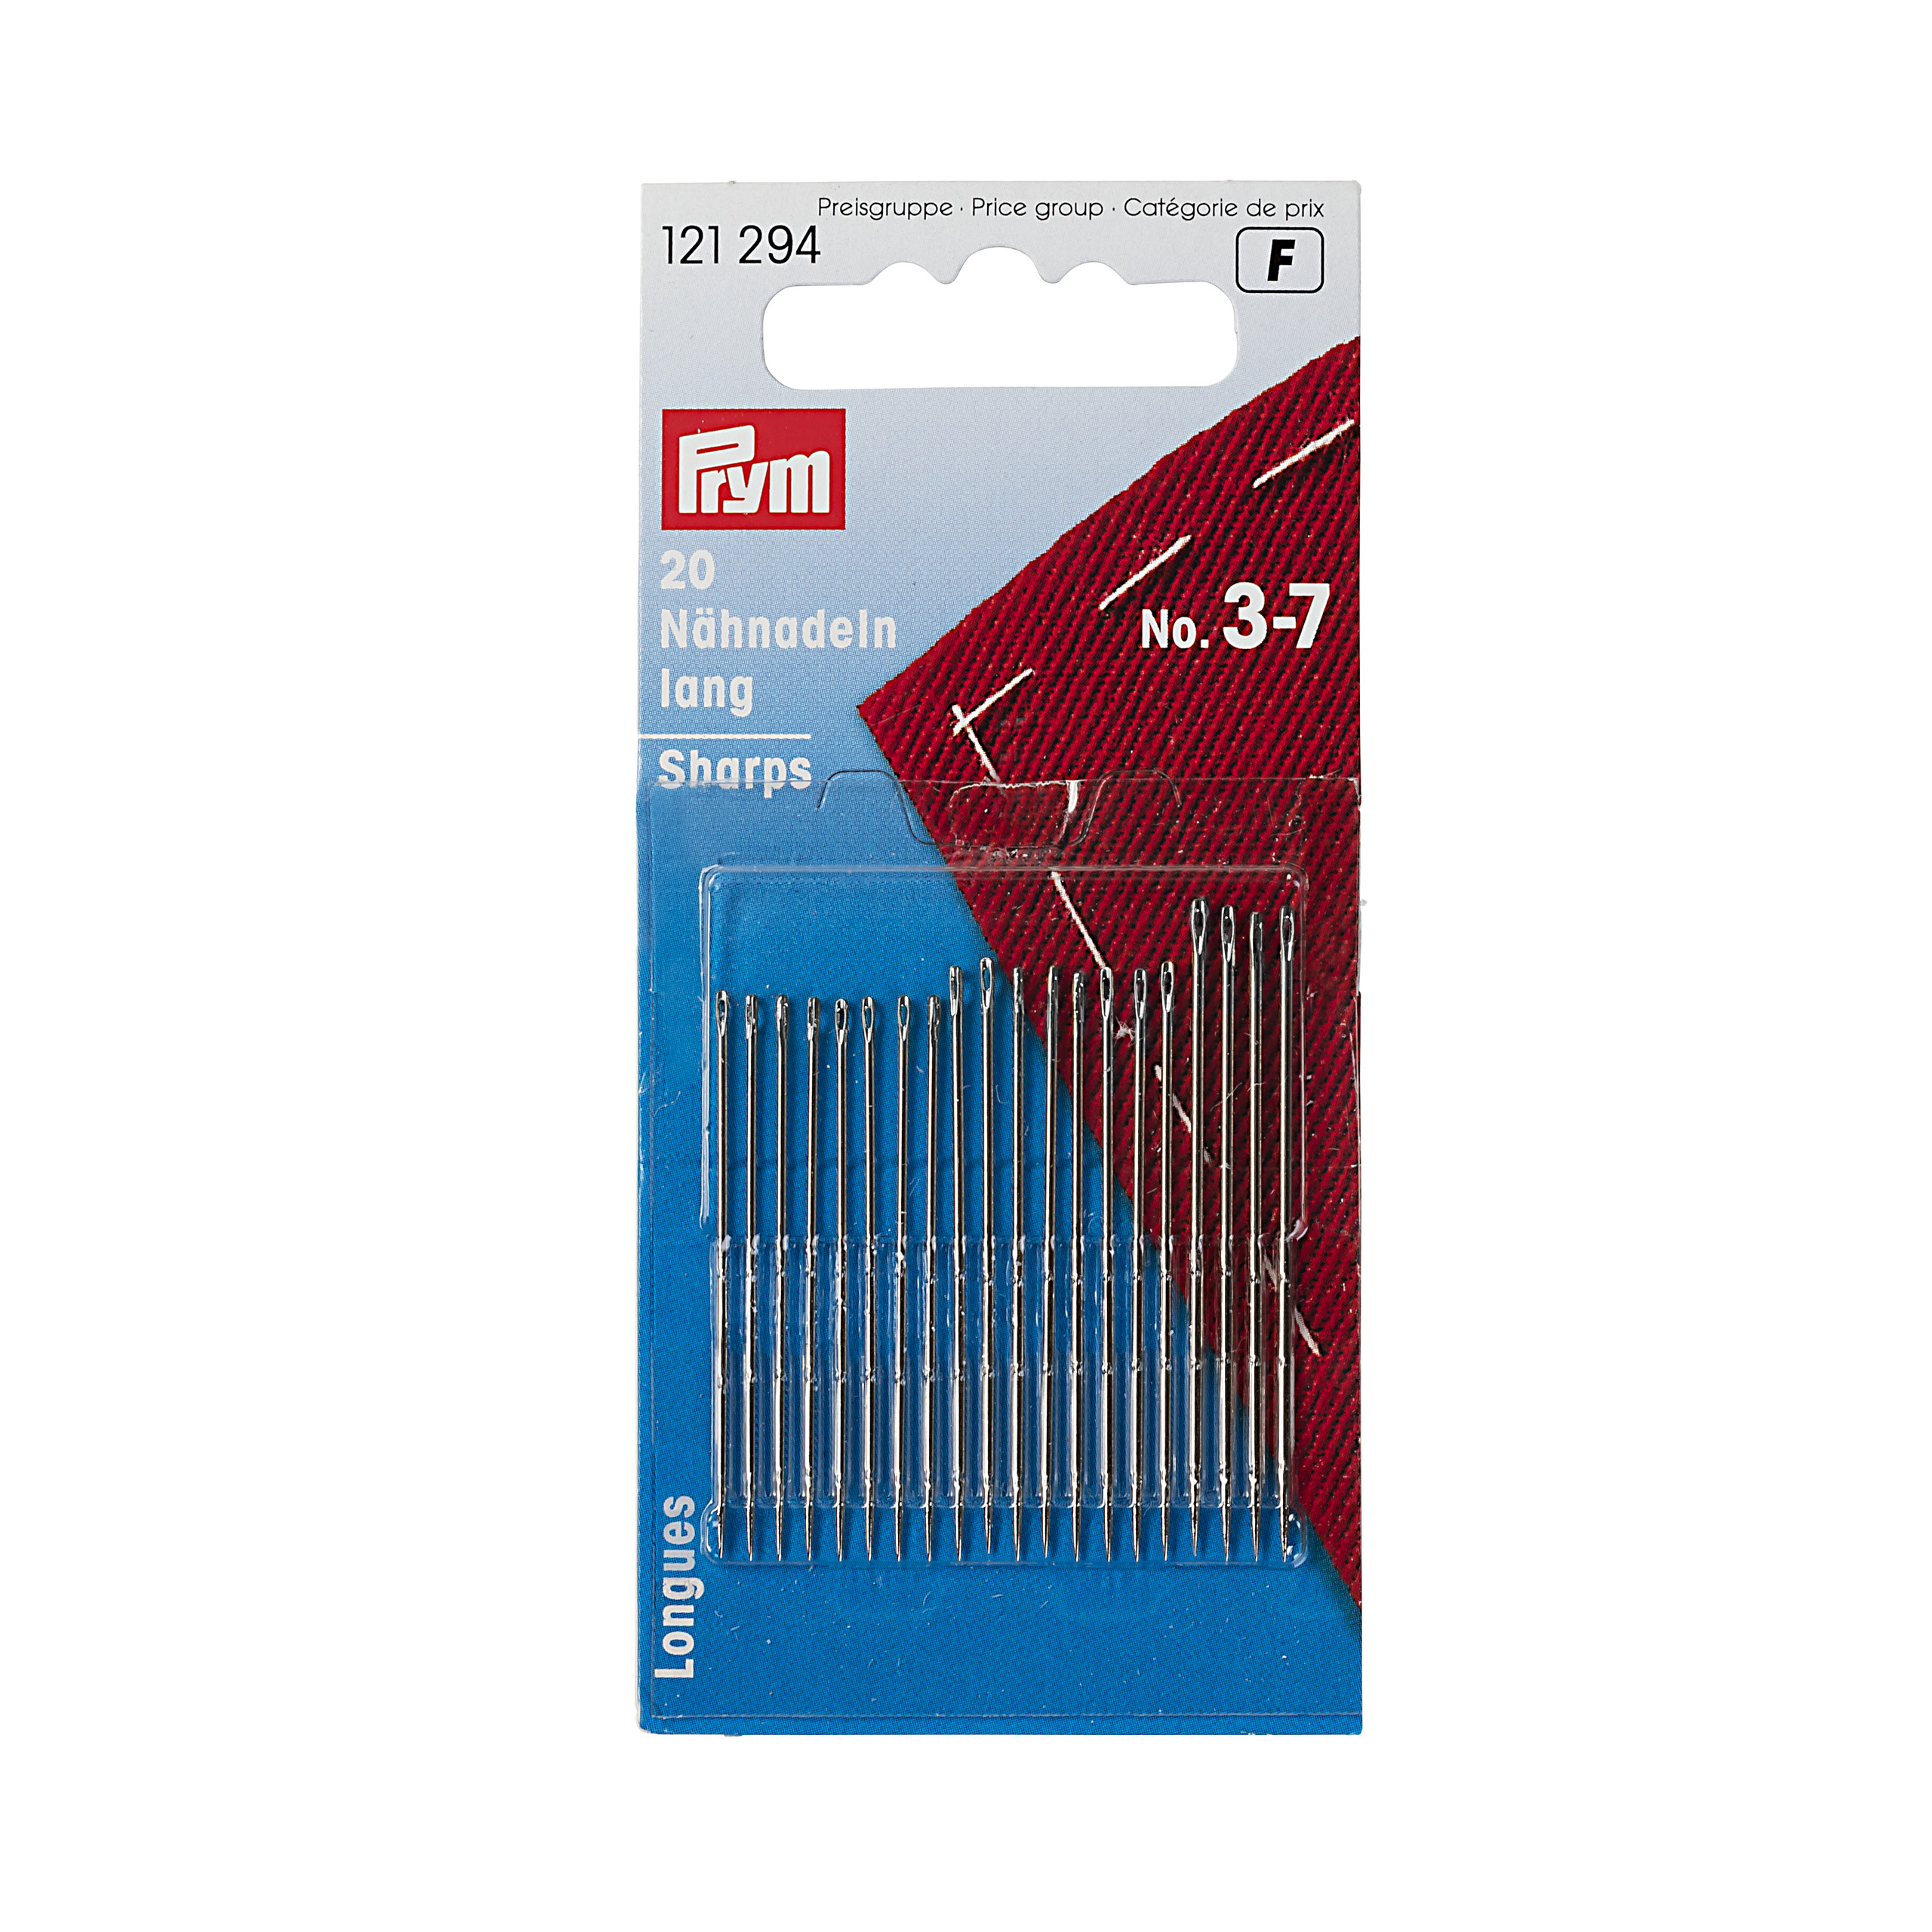 Hand Sewing Needles sharps 3-7 assorted silver col with gold eye, 20 St